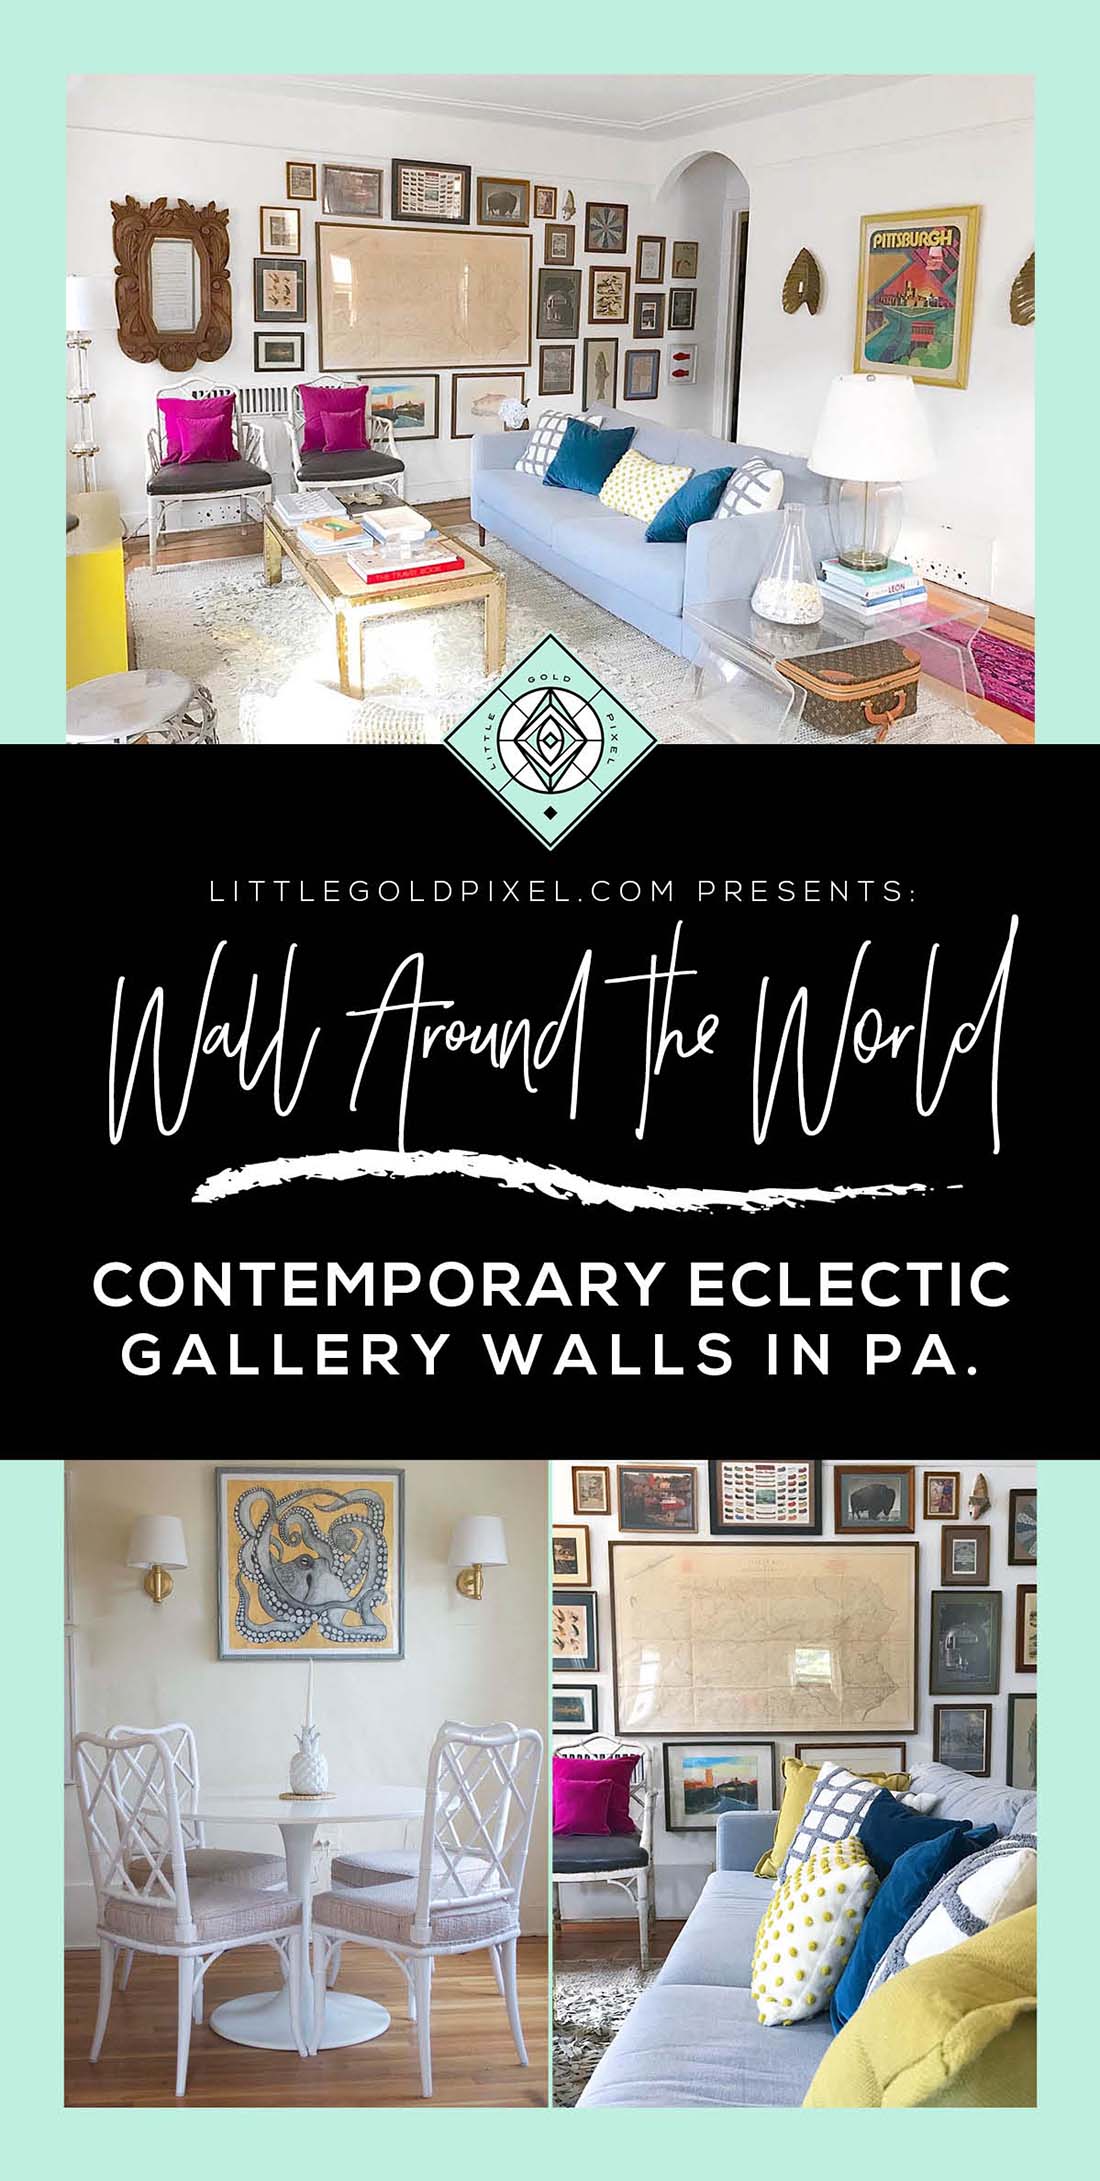 Wall Around the World: A Gallery Wall Series by Little Gold Pixel • Part 3: Contemporary Eclectic Gallery Wall in Pittsburgh • All photos ©Erin/freshzen.org